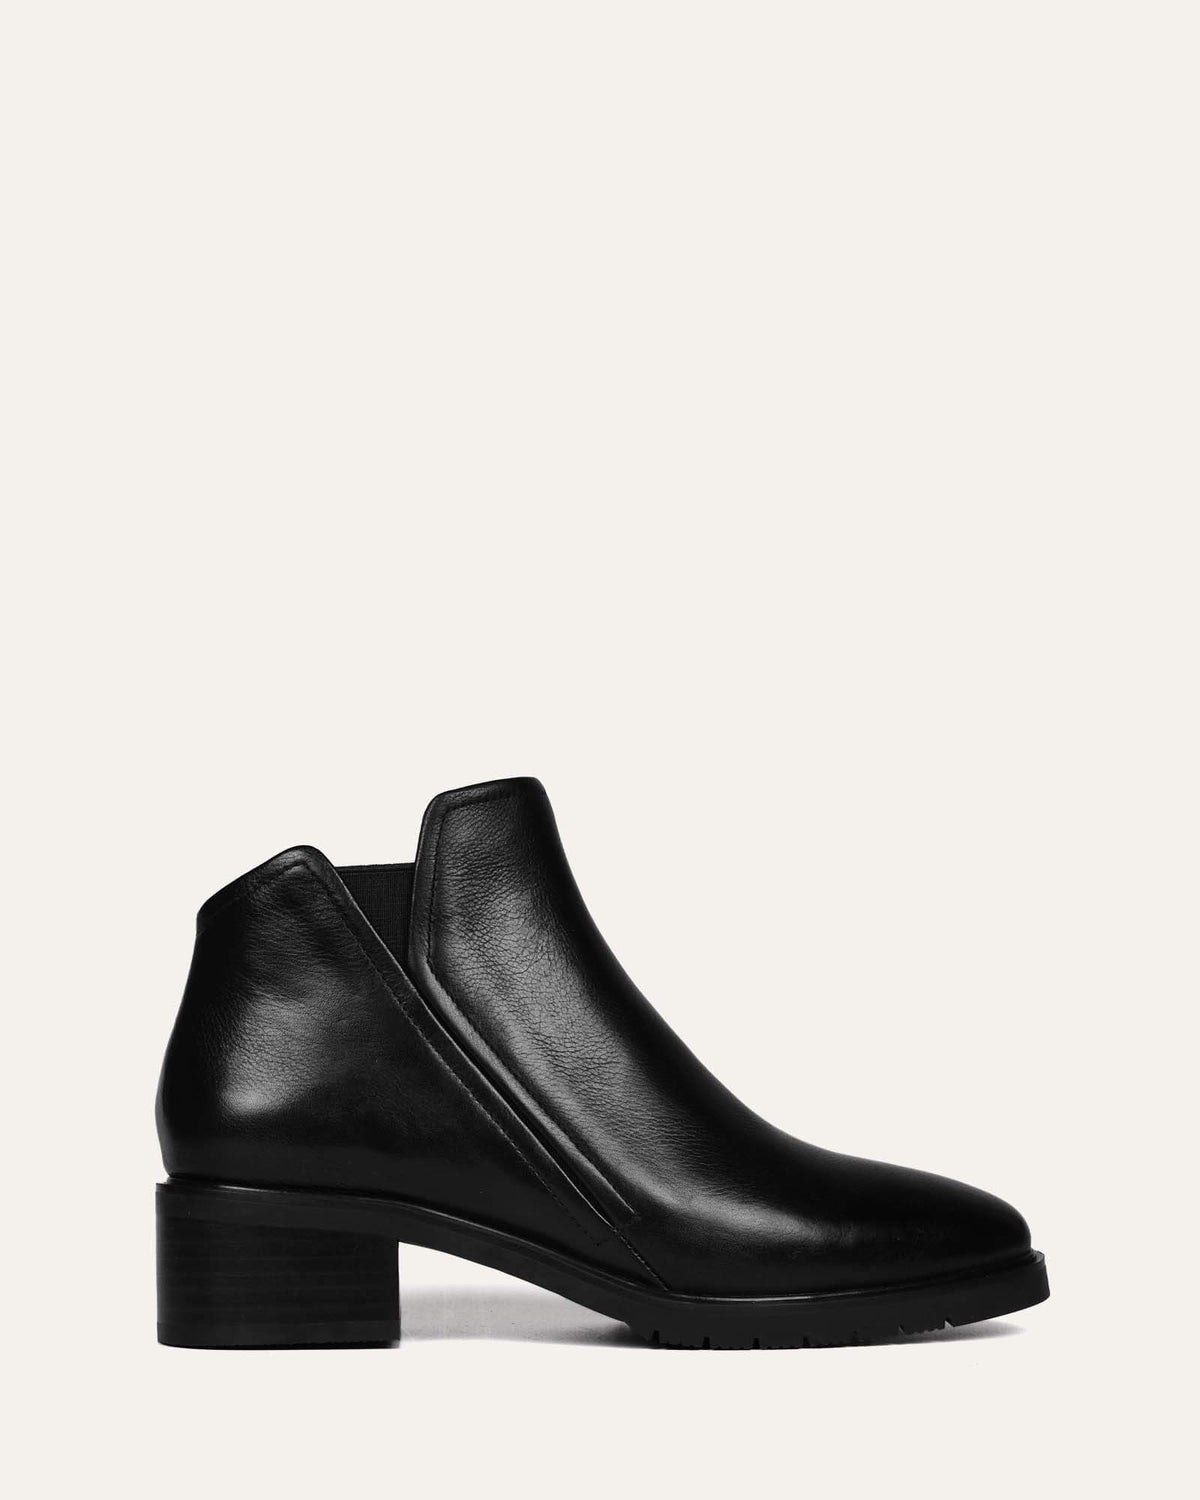 ARTIE FLAT ANKLE BOOTS BLACK LEATHER